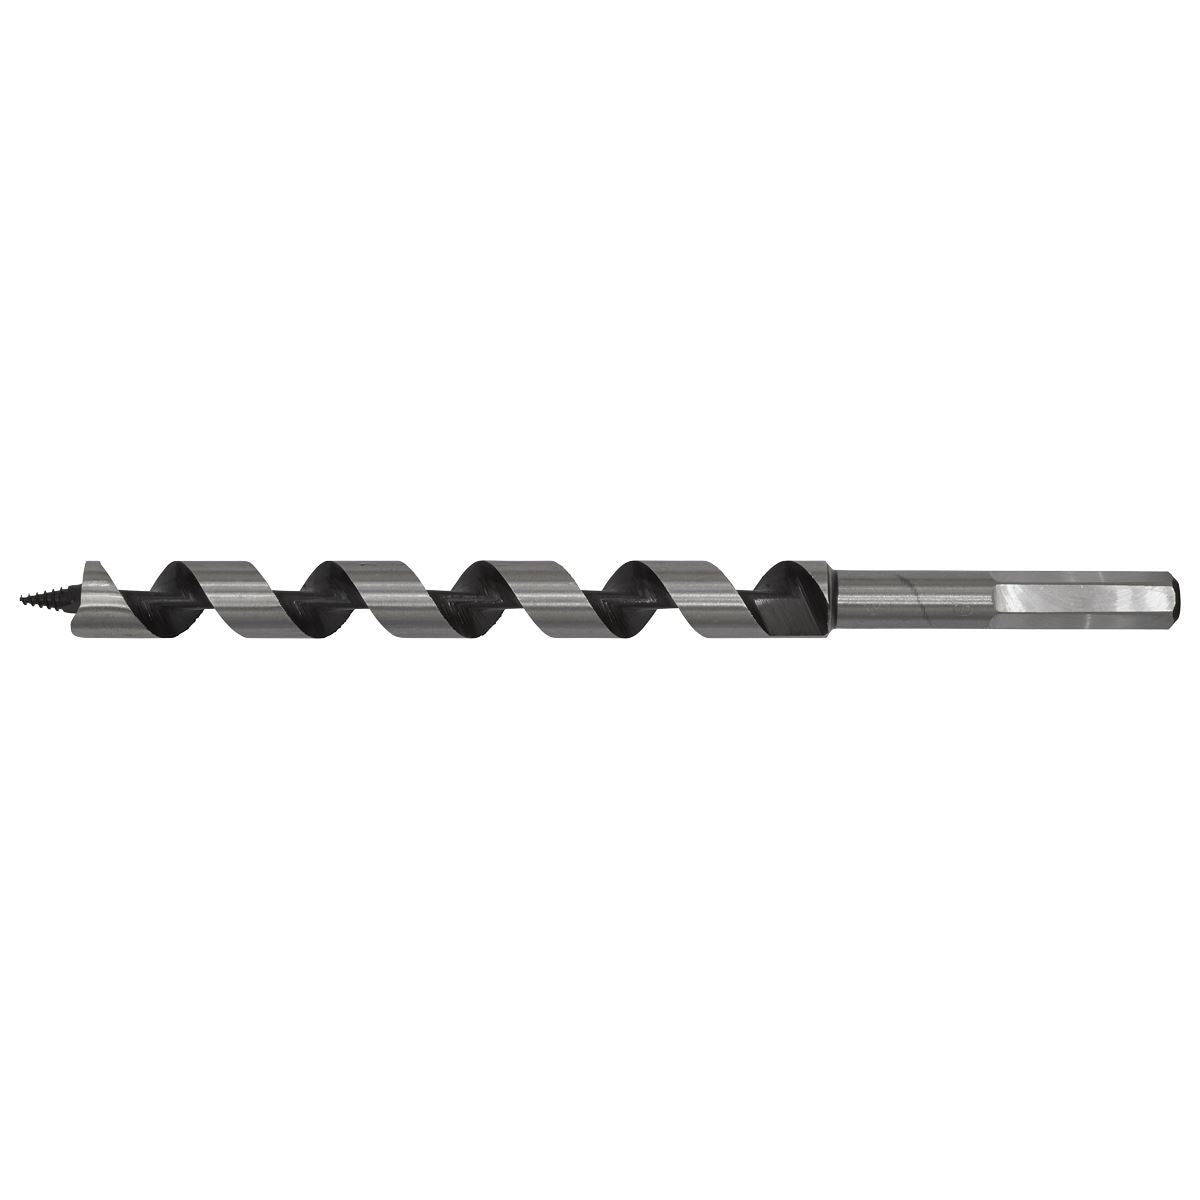 Worksafe by Sealey Auger Wood Drill Bit 16mm x 235mm